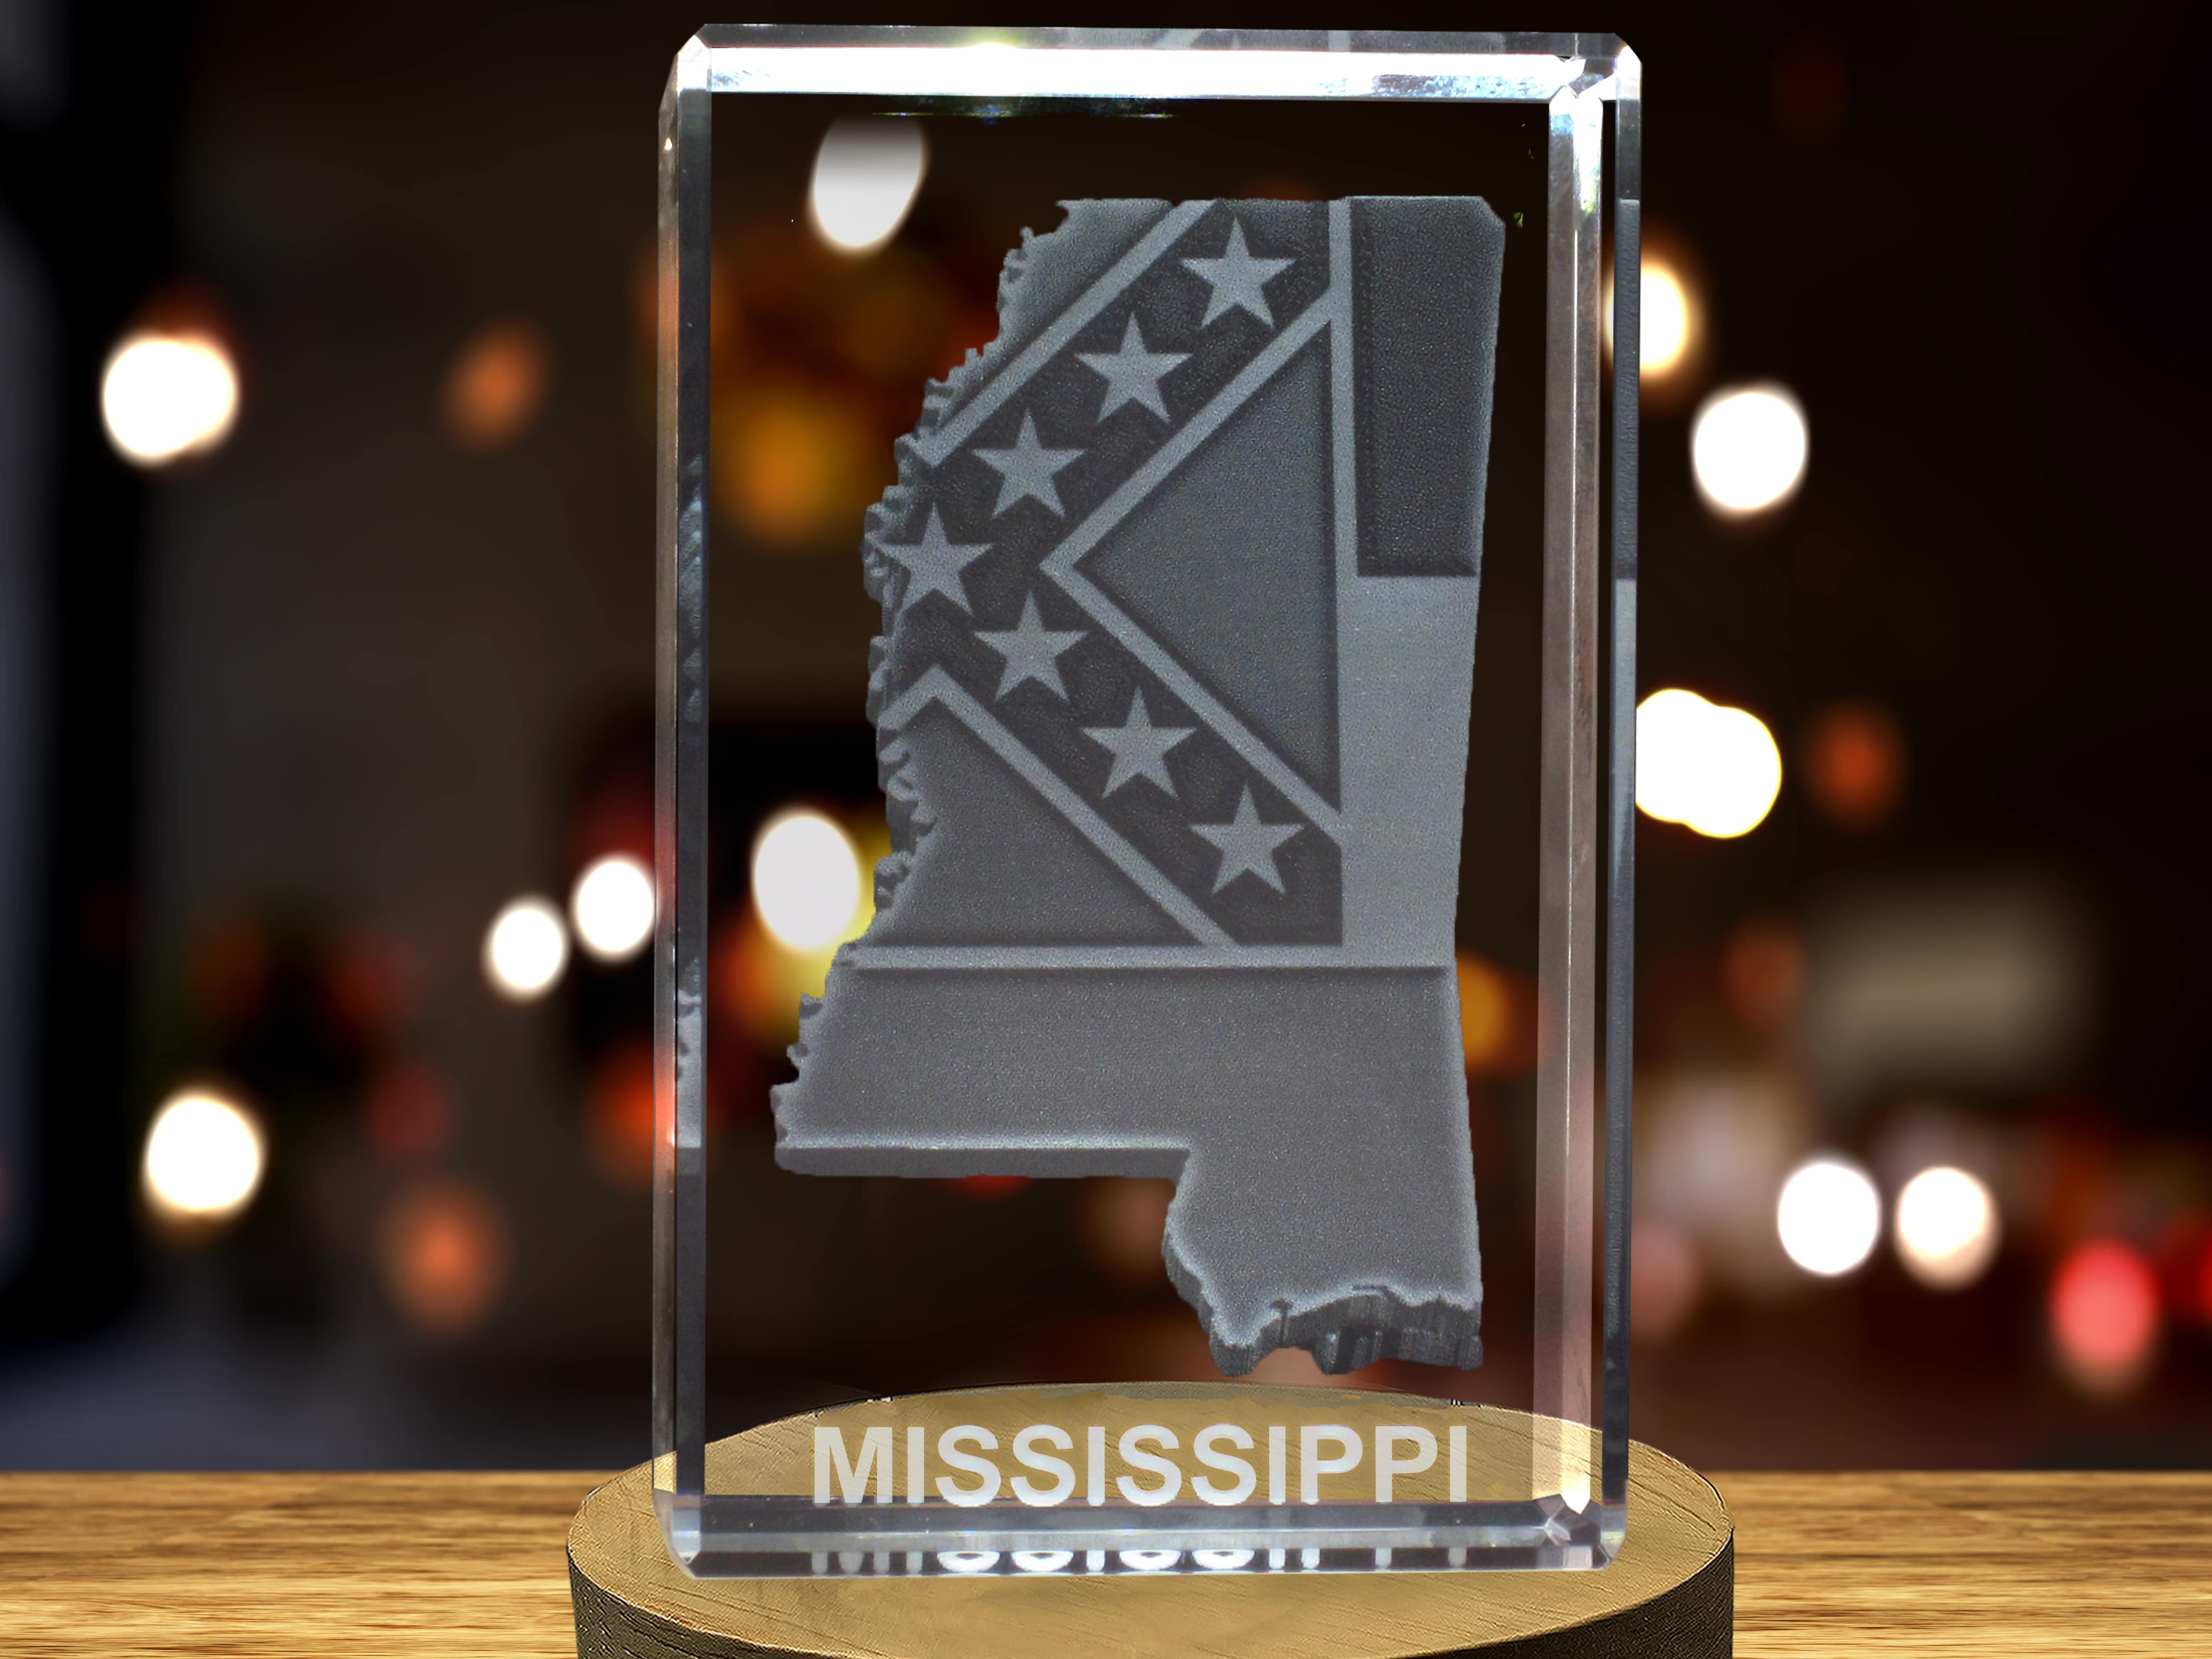 Mississippi 3D Engraved Crystal 3D Engraved Crystal Keepsake/Gift/Decor/Collectible/Souvenir A&B Crystal Collection